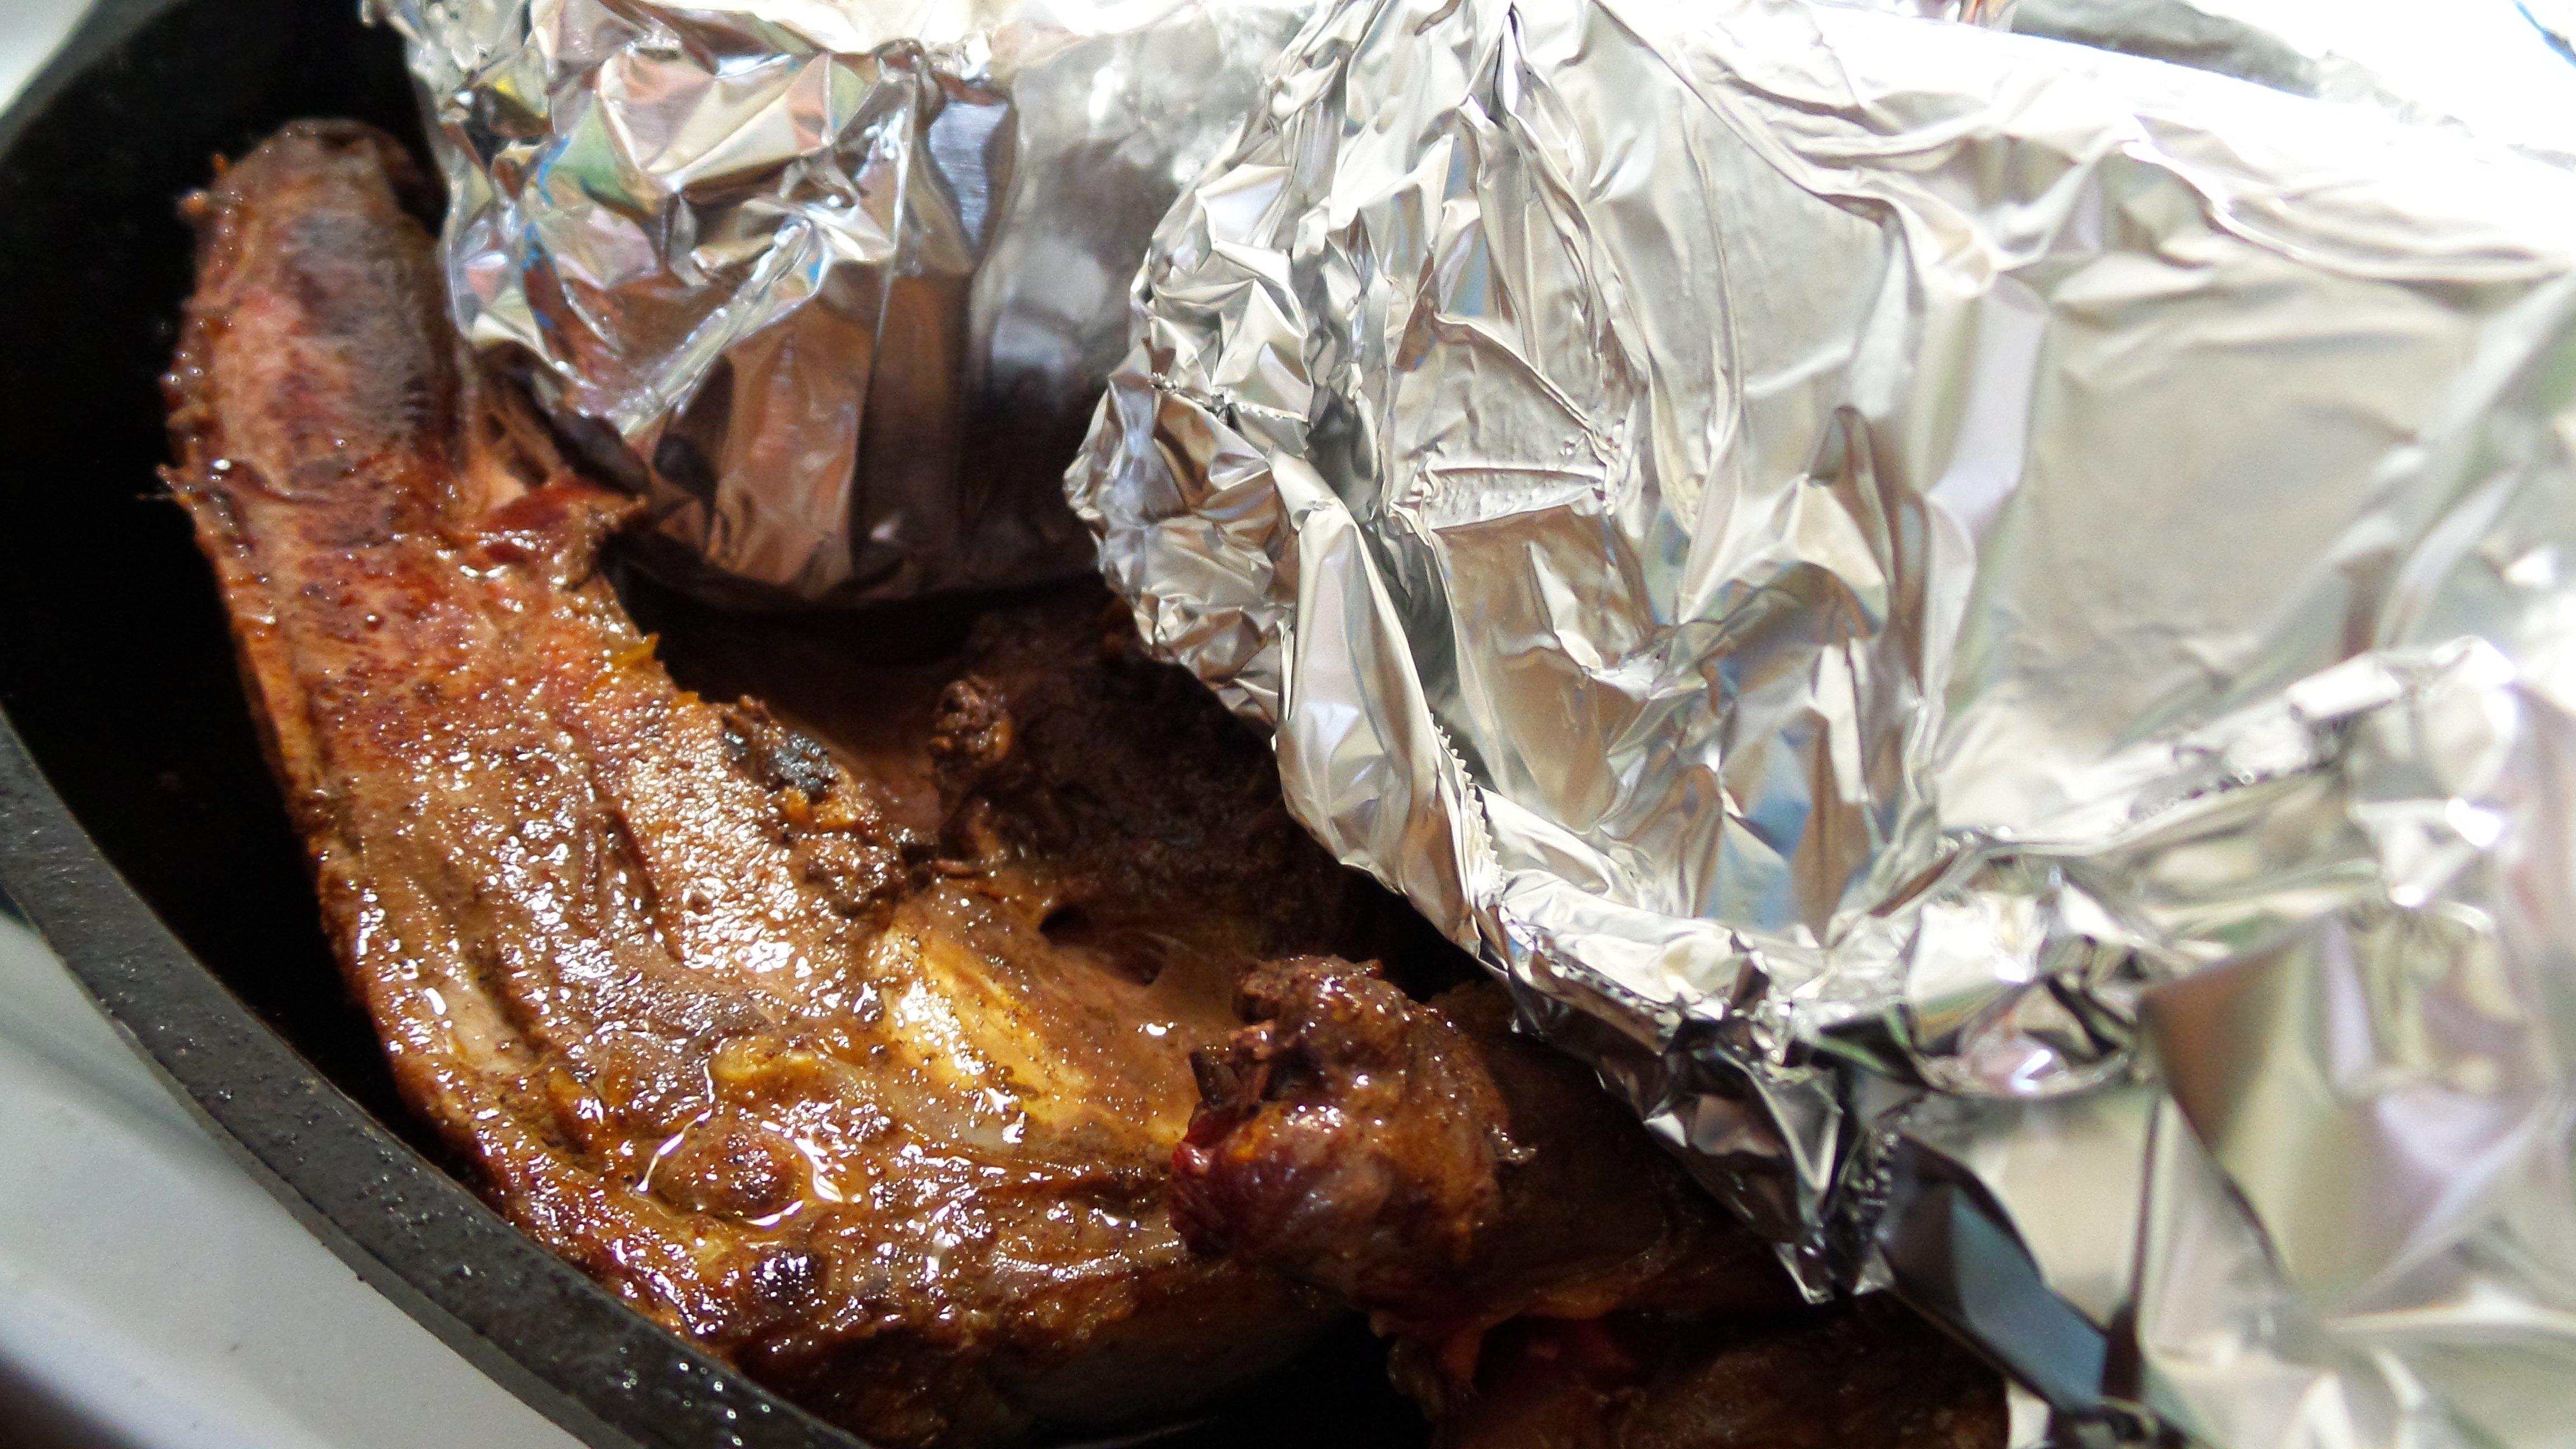 Foil wrapped bricks press the duck's skin tightly against the iron skillet for a perfect sear. 